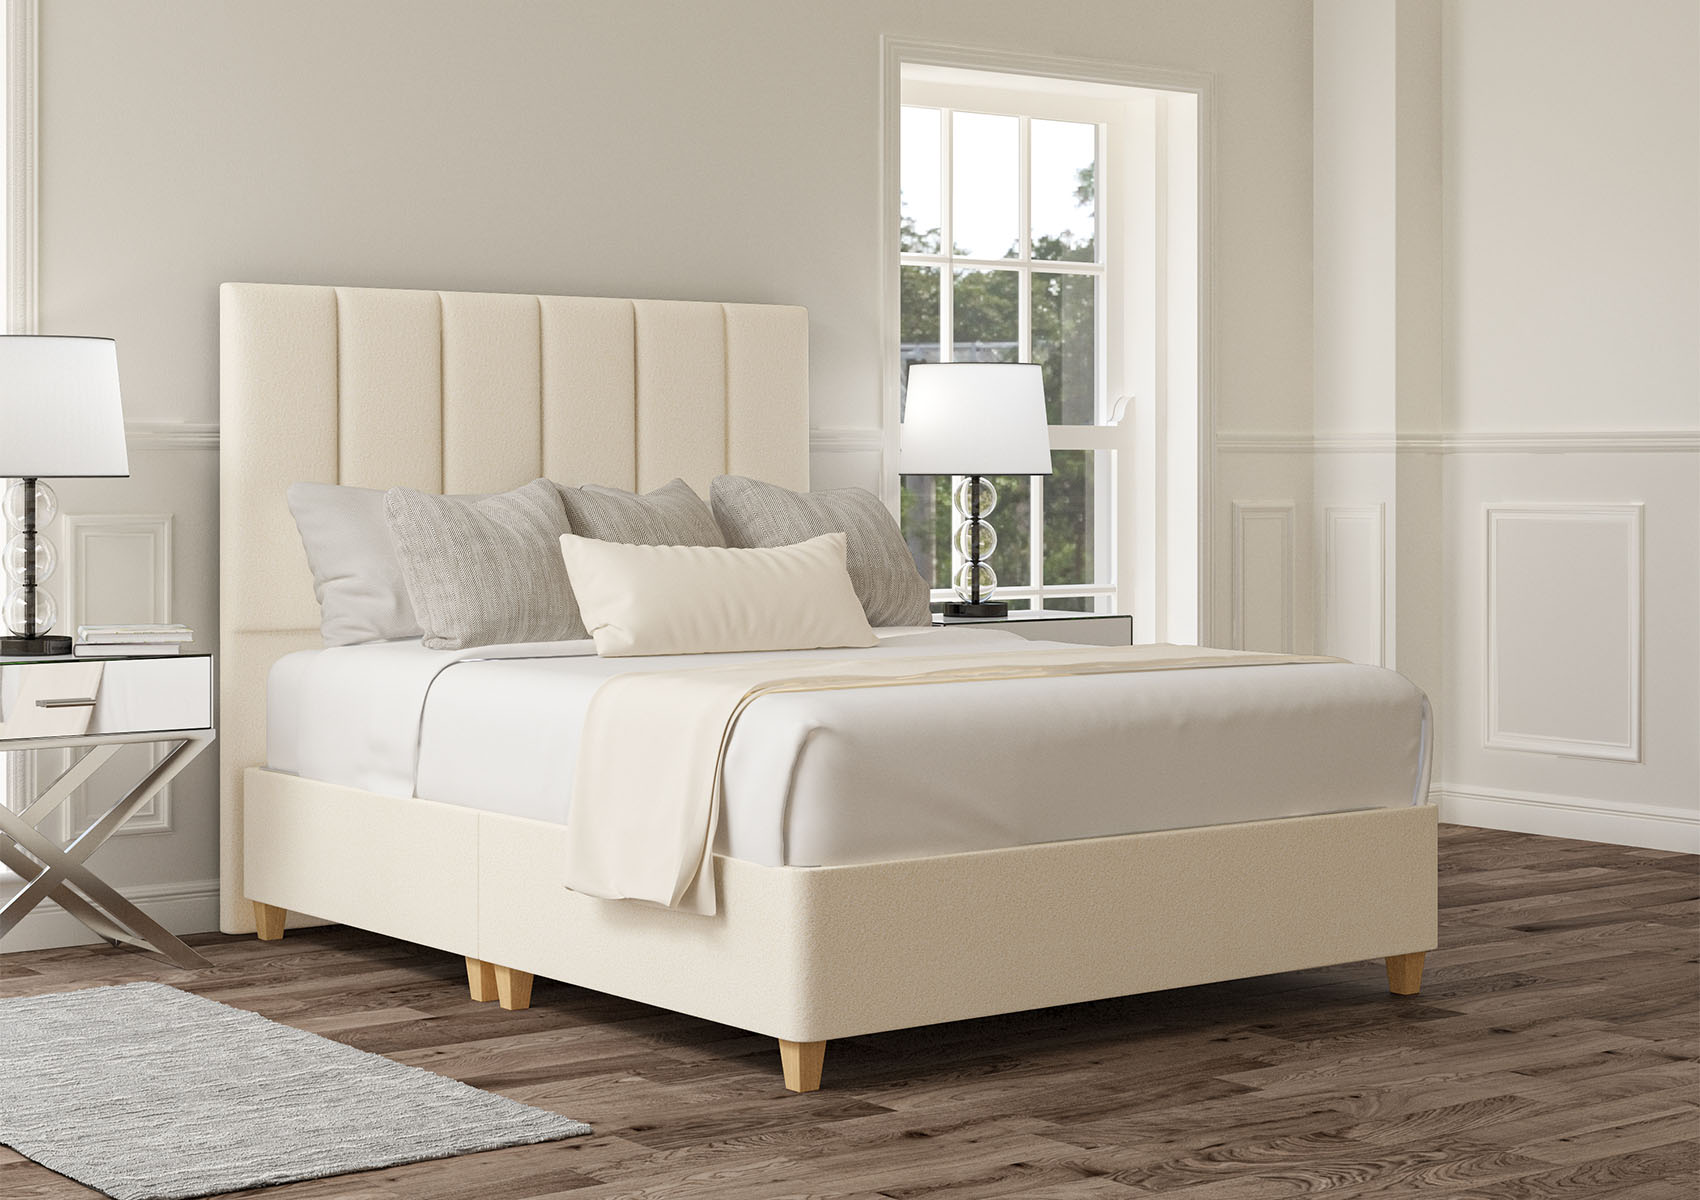 View Empire Carina Parchment Upholstered Single Divan Bed Time4Sleep information